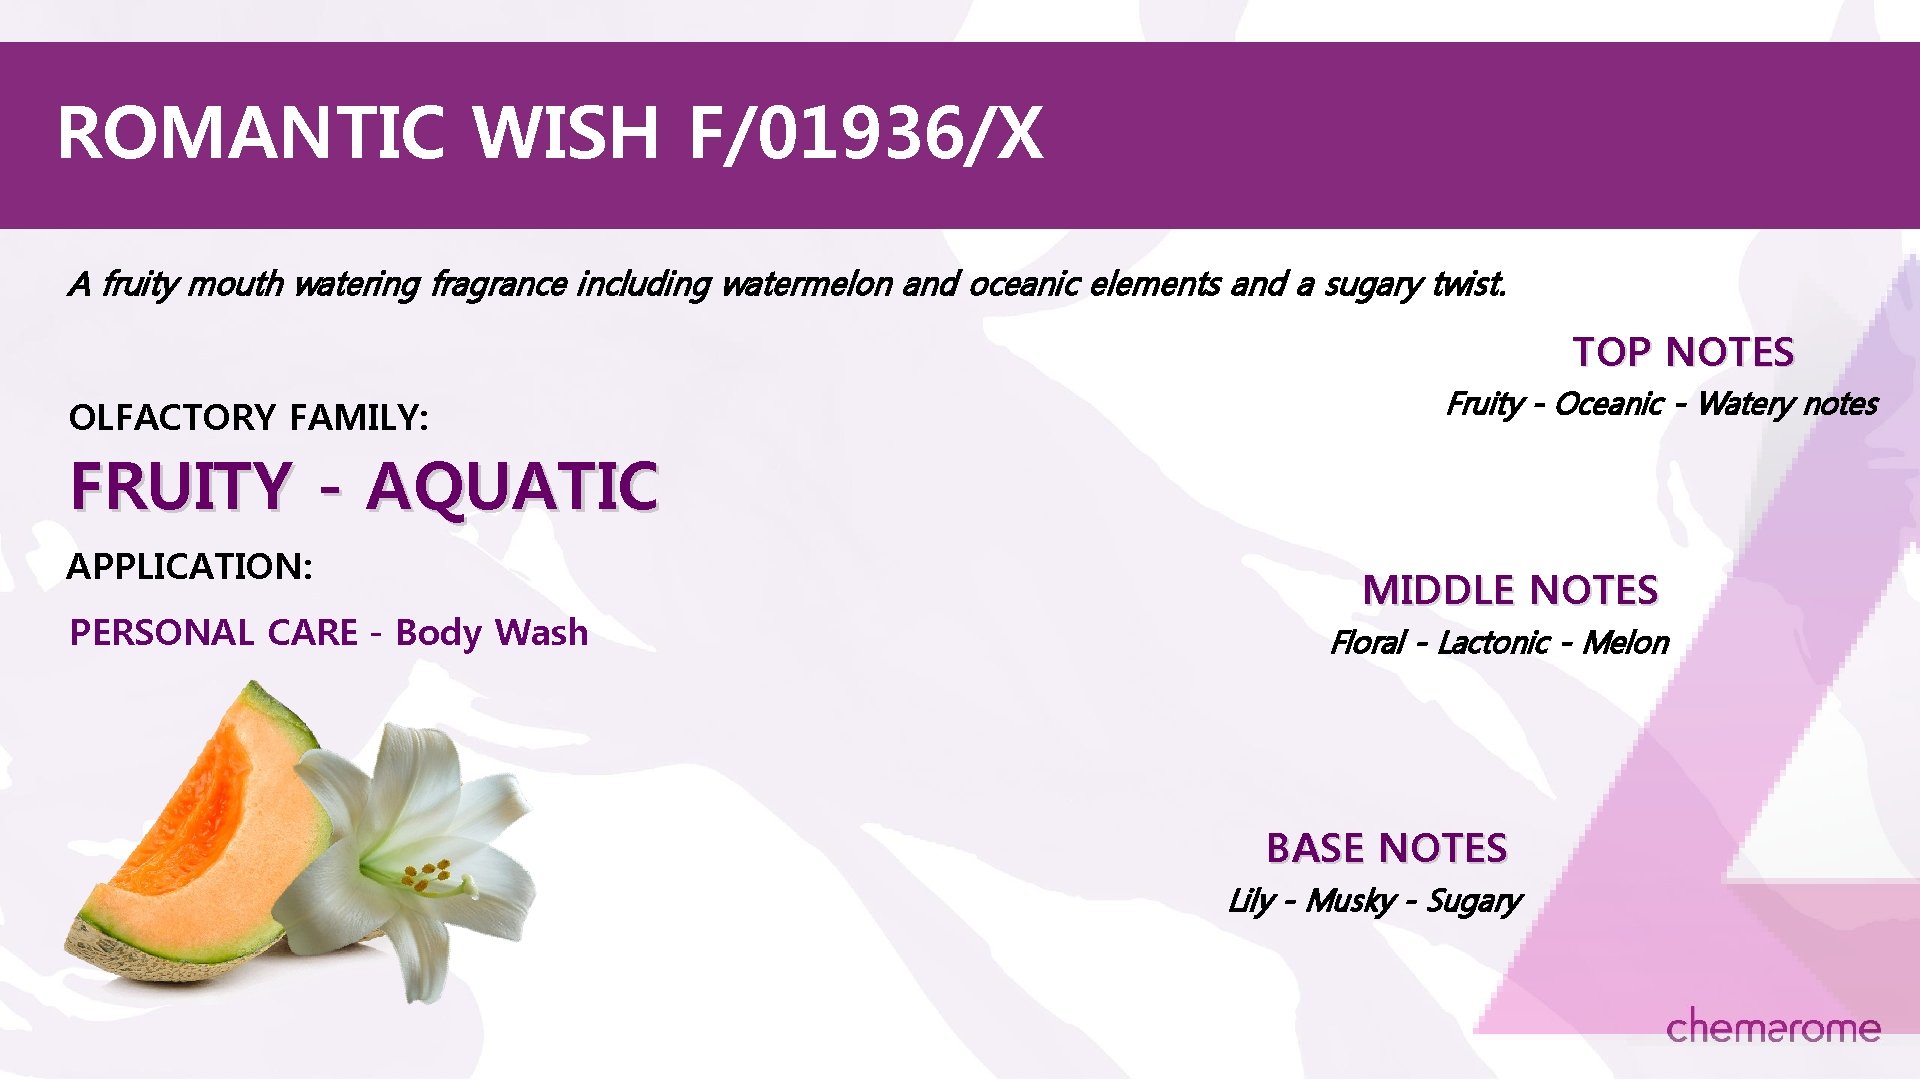 ROMANTIC WISH F/01936/X A fruity mouth watering fragrance including watermelon and oceanic elements and